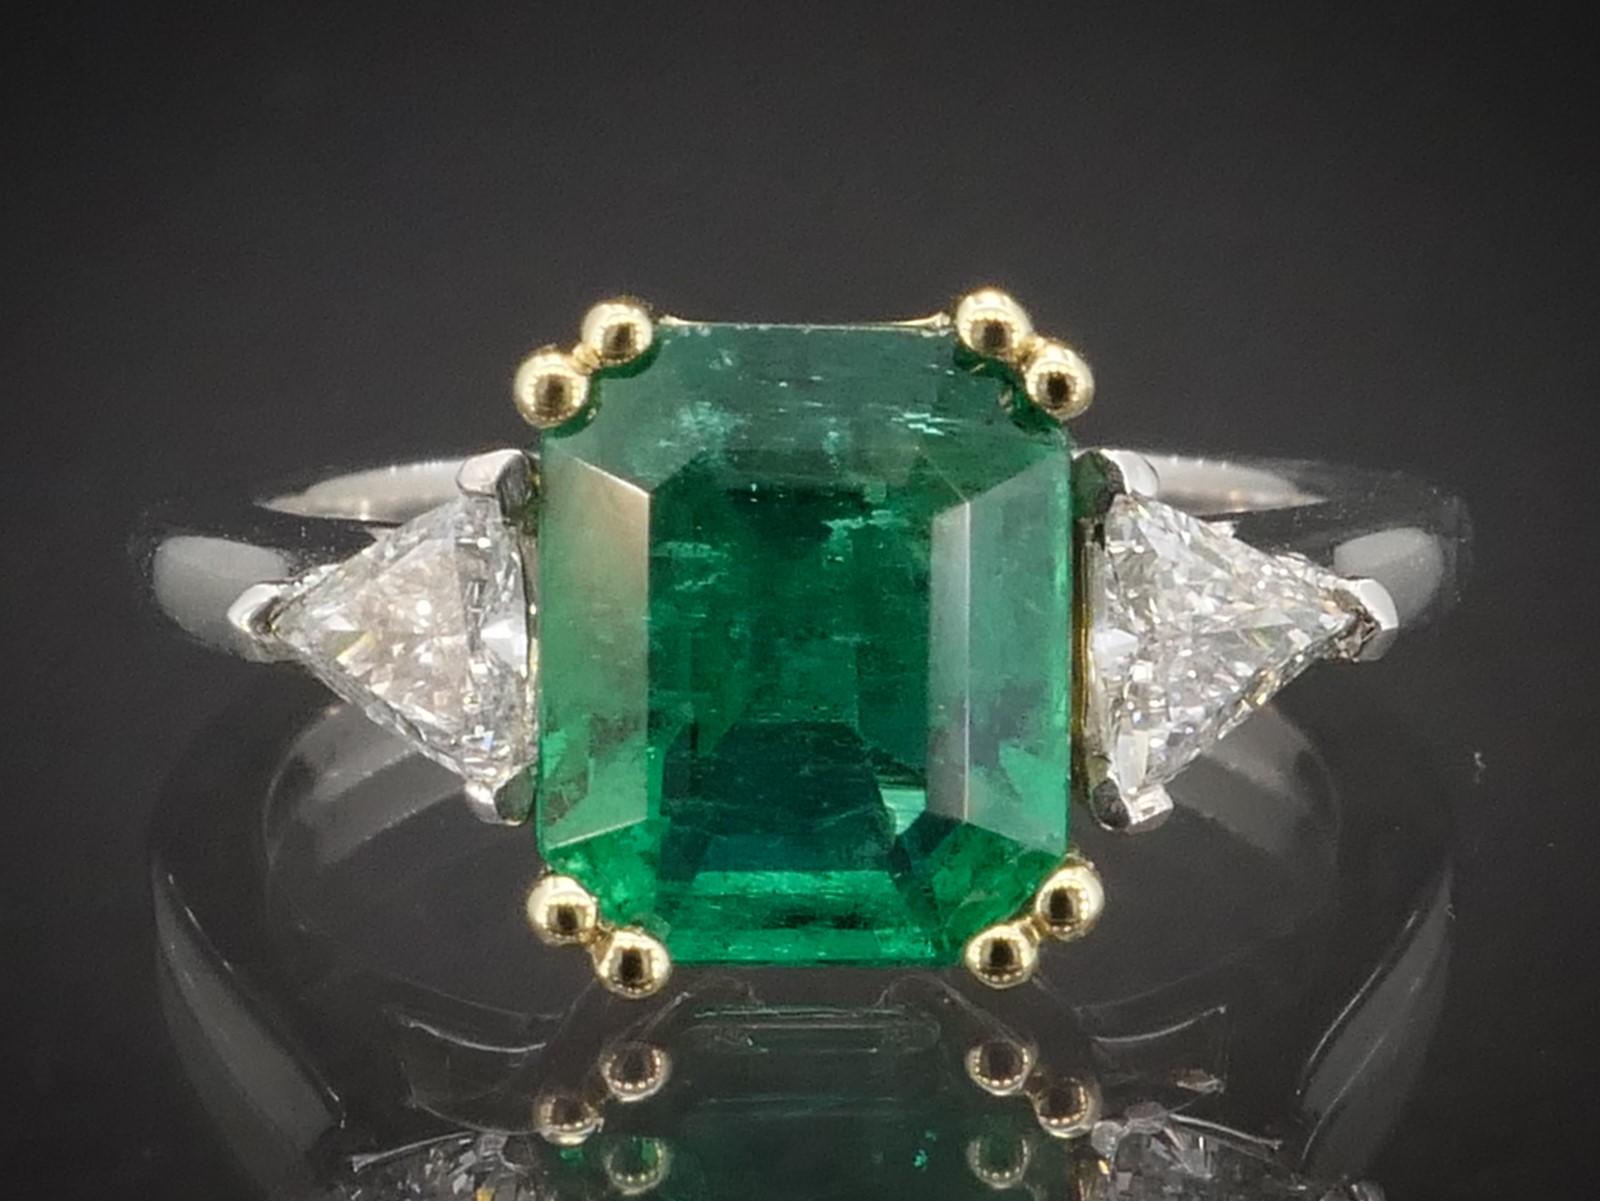 Beautiful two tone mounting made from platinum and 18k yellow gold. Newly mounted 1.88ct (8.6mm by 7.1mm ) Zambian Emerald set in the middle with .31ctw of trillion cut diamond accents. SI1 clarity with HI color. Unique combo and cut to the stones